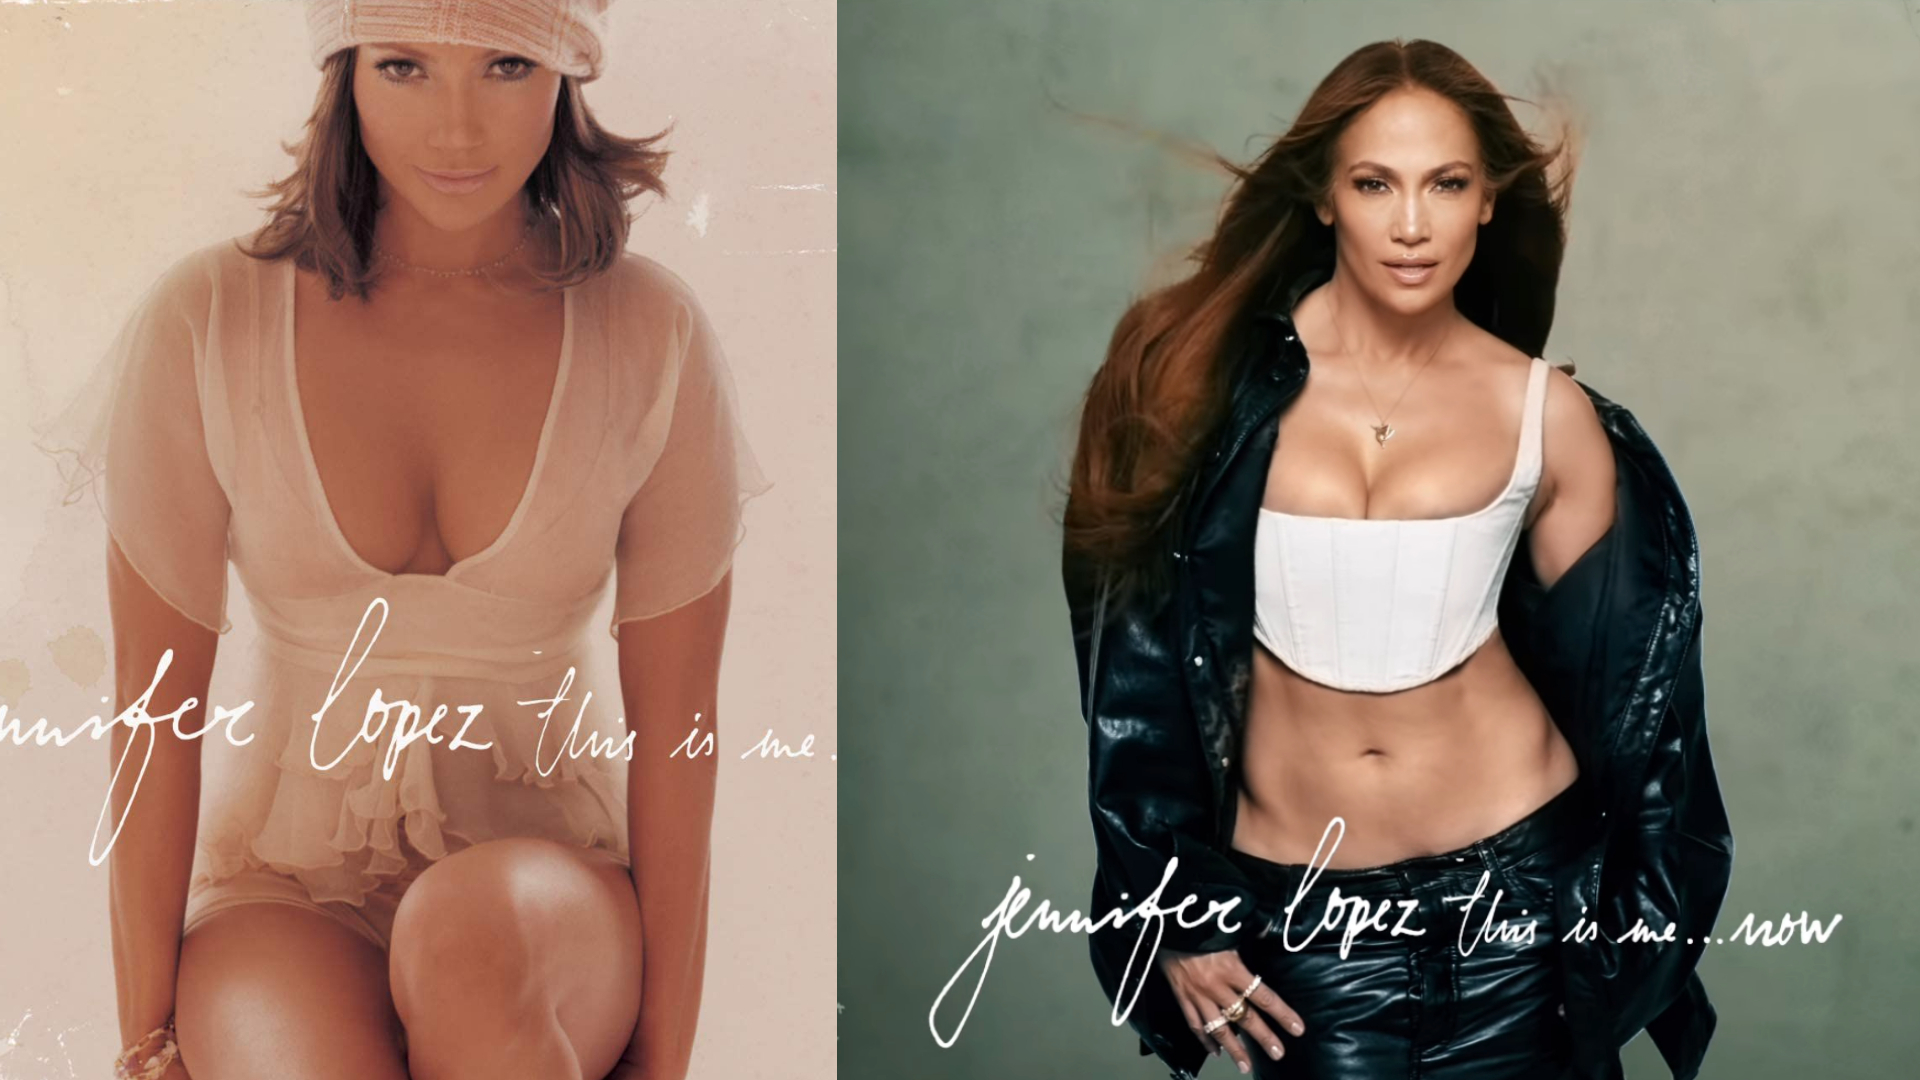 Jennifer Lopez announces first album in 8 years